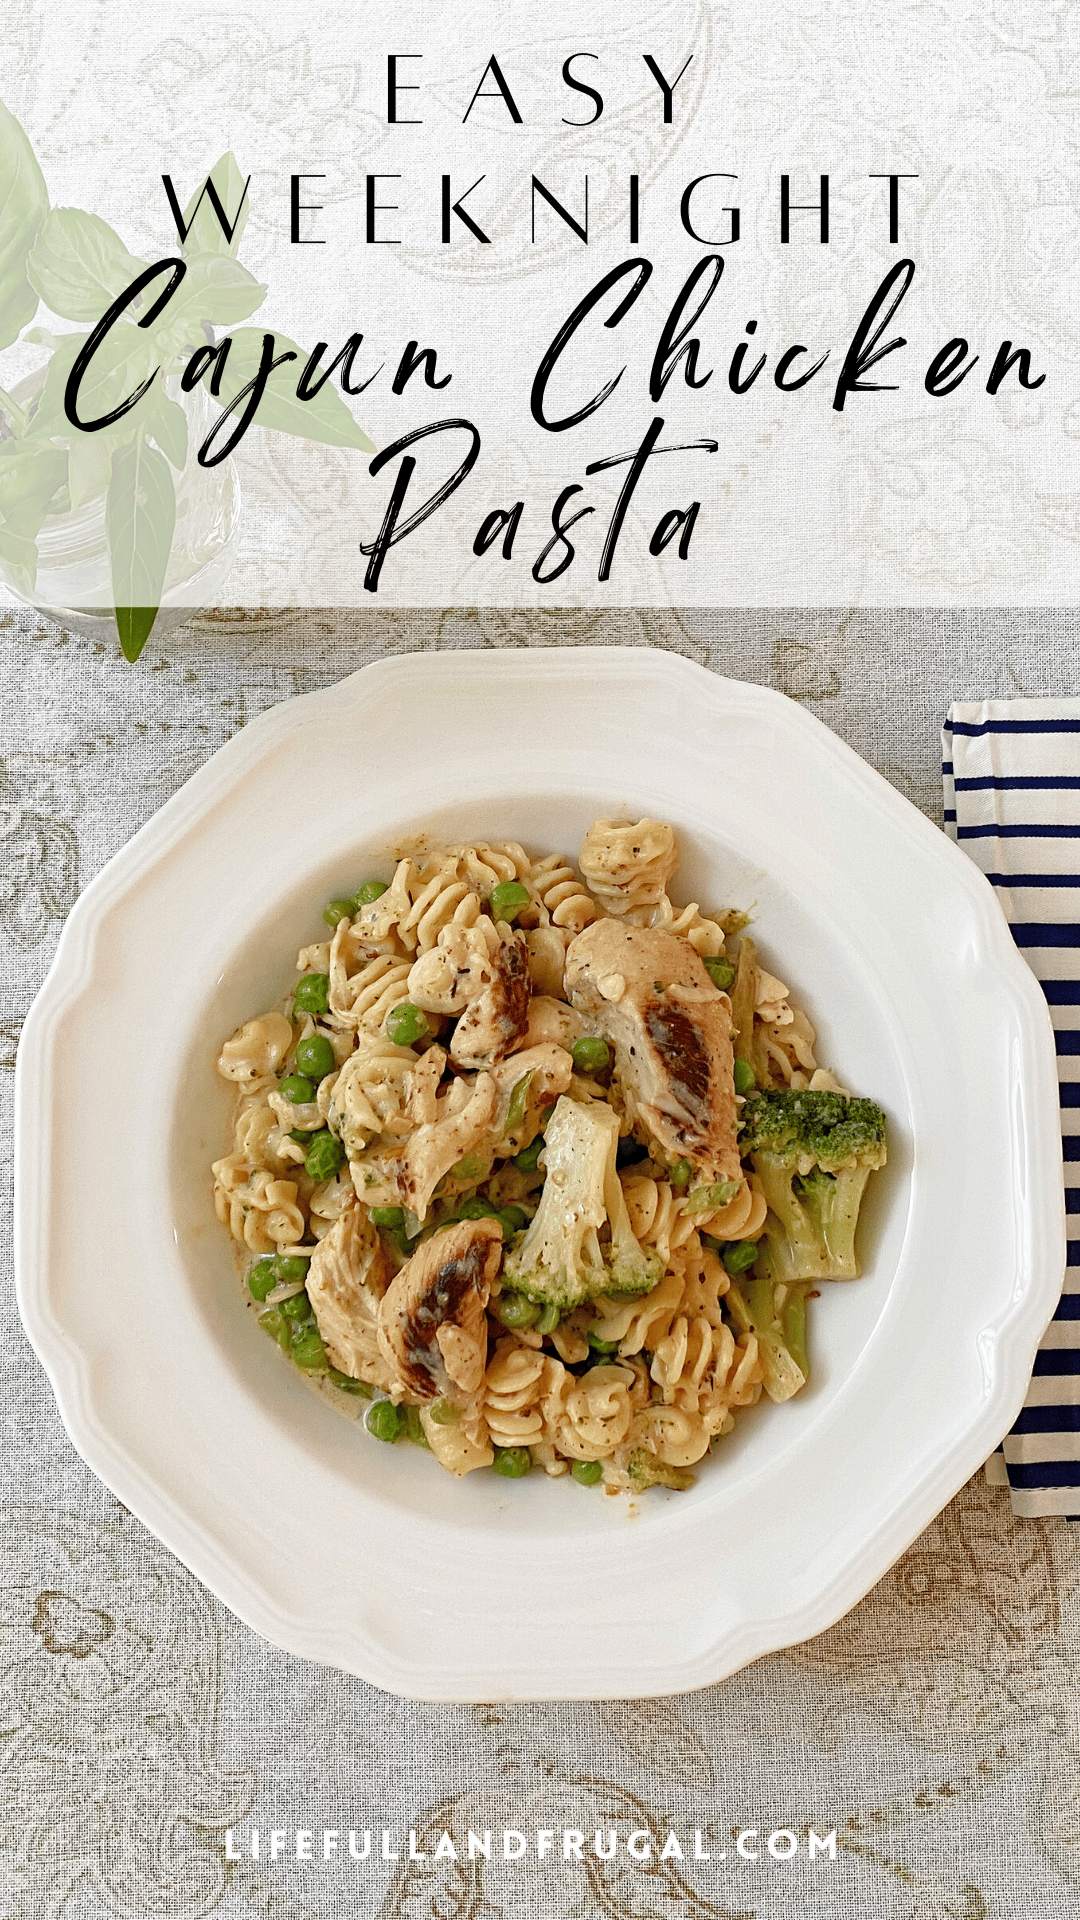 easy homemade cajun chicken pasta with a cream cheese alfredo sauce and veggies - Life Full and Frugal